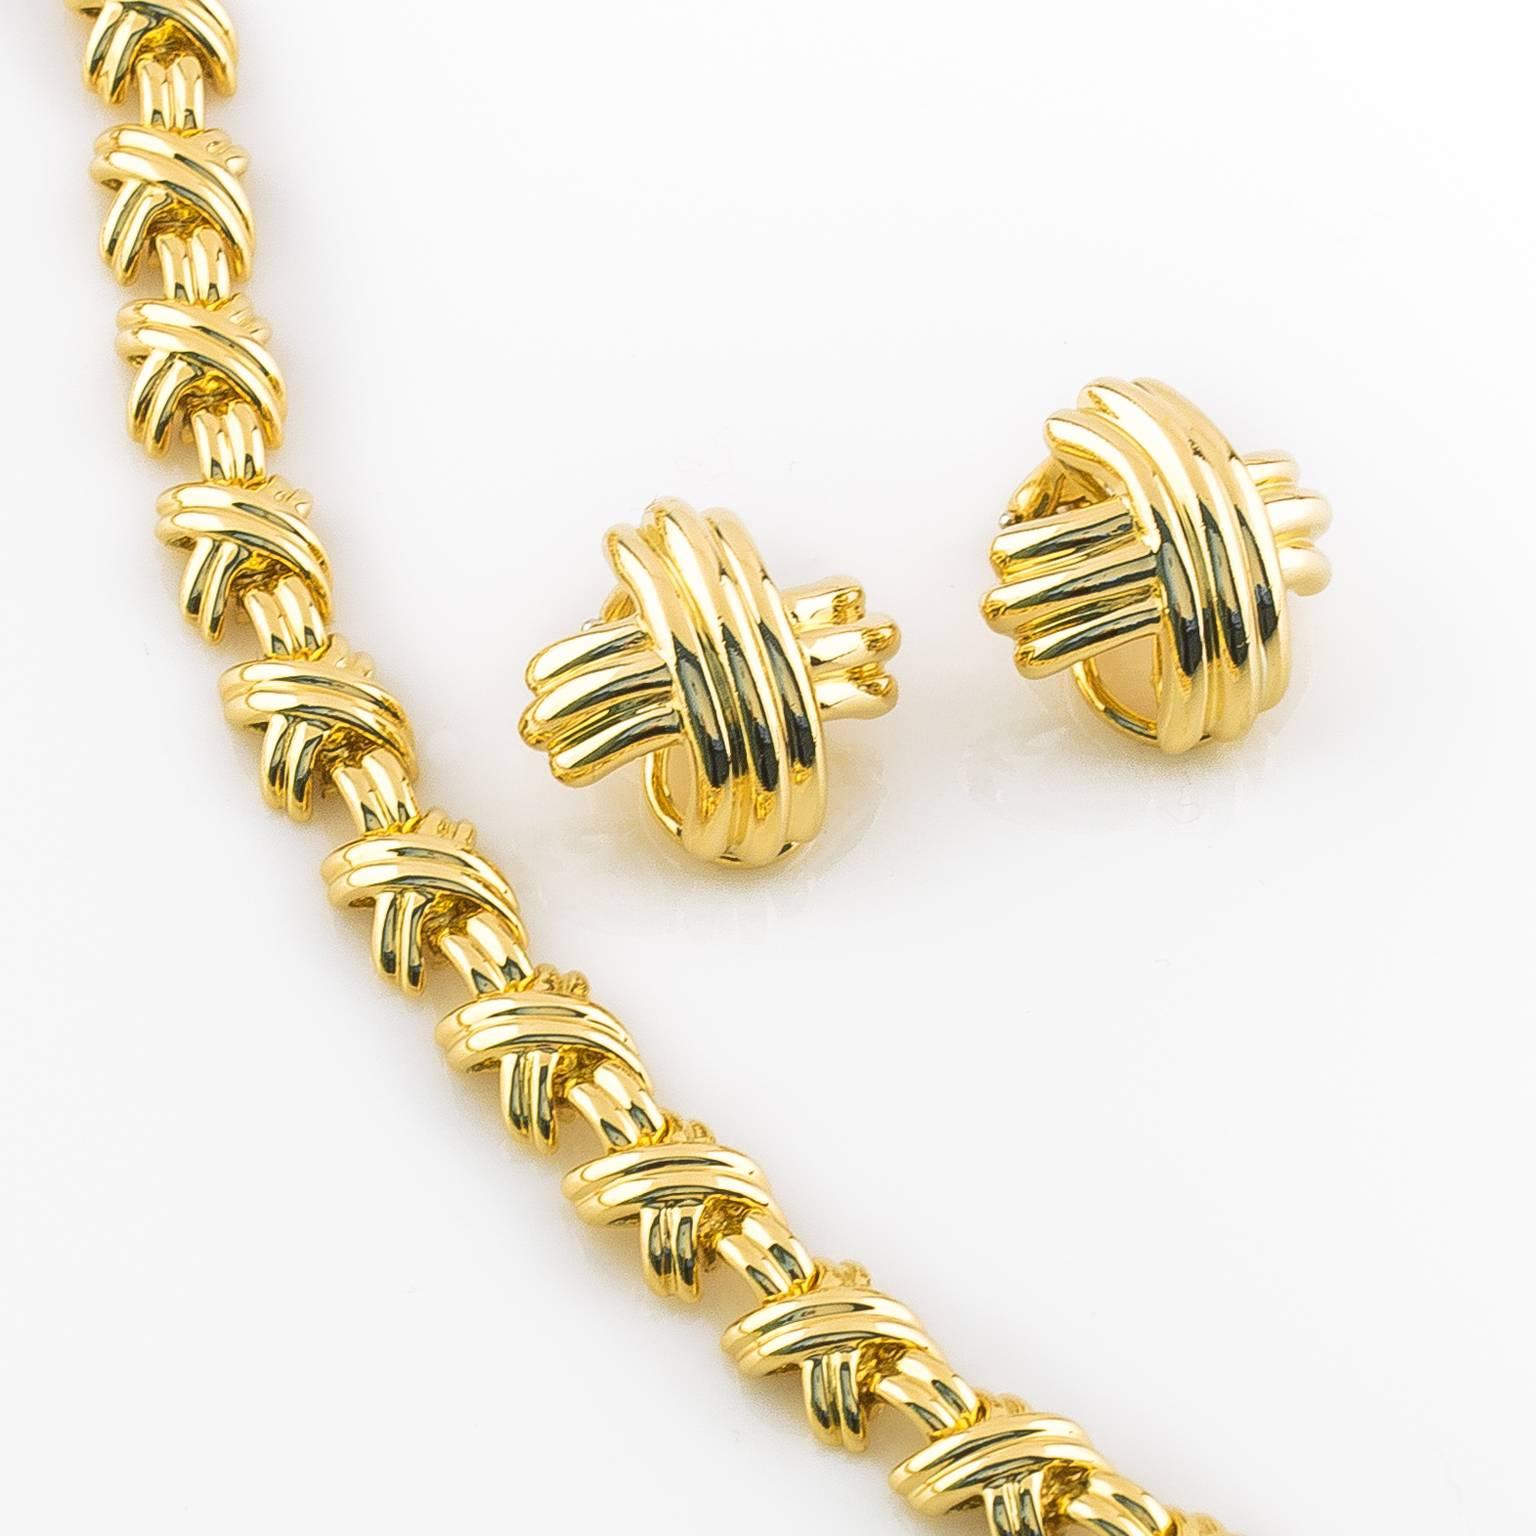 Paloma Picasso’s Signature X necklace and earrings from the Signature Collection. The bold x design is 18k yellow gold featuring polished surfaces and contemporary lines. Earrings are clip-on. Sold as a set.

Necklace 16in L (15.24 cm) Earrings